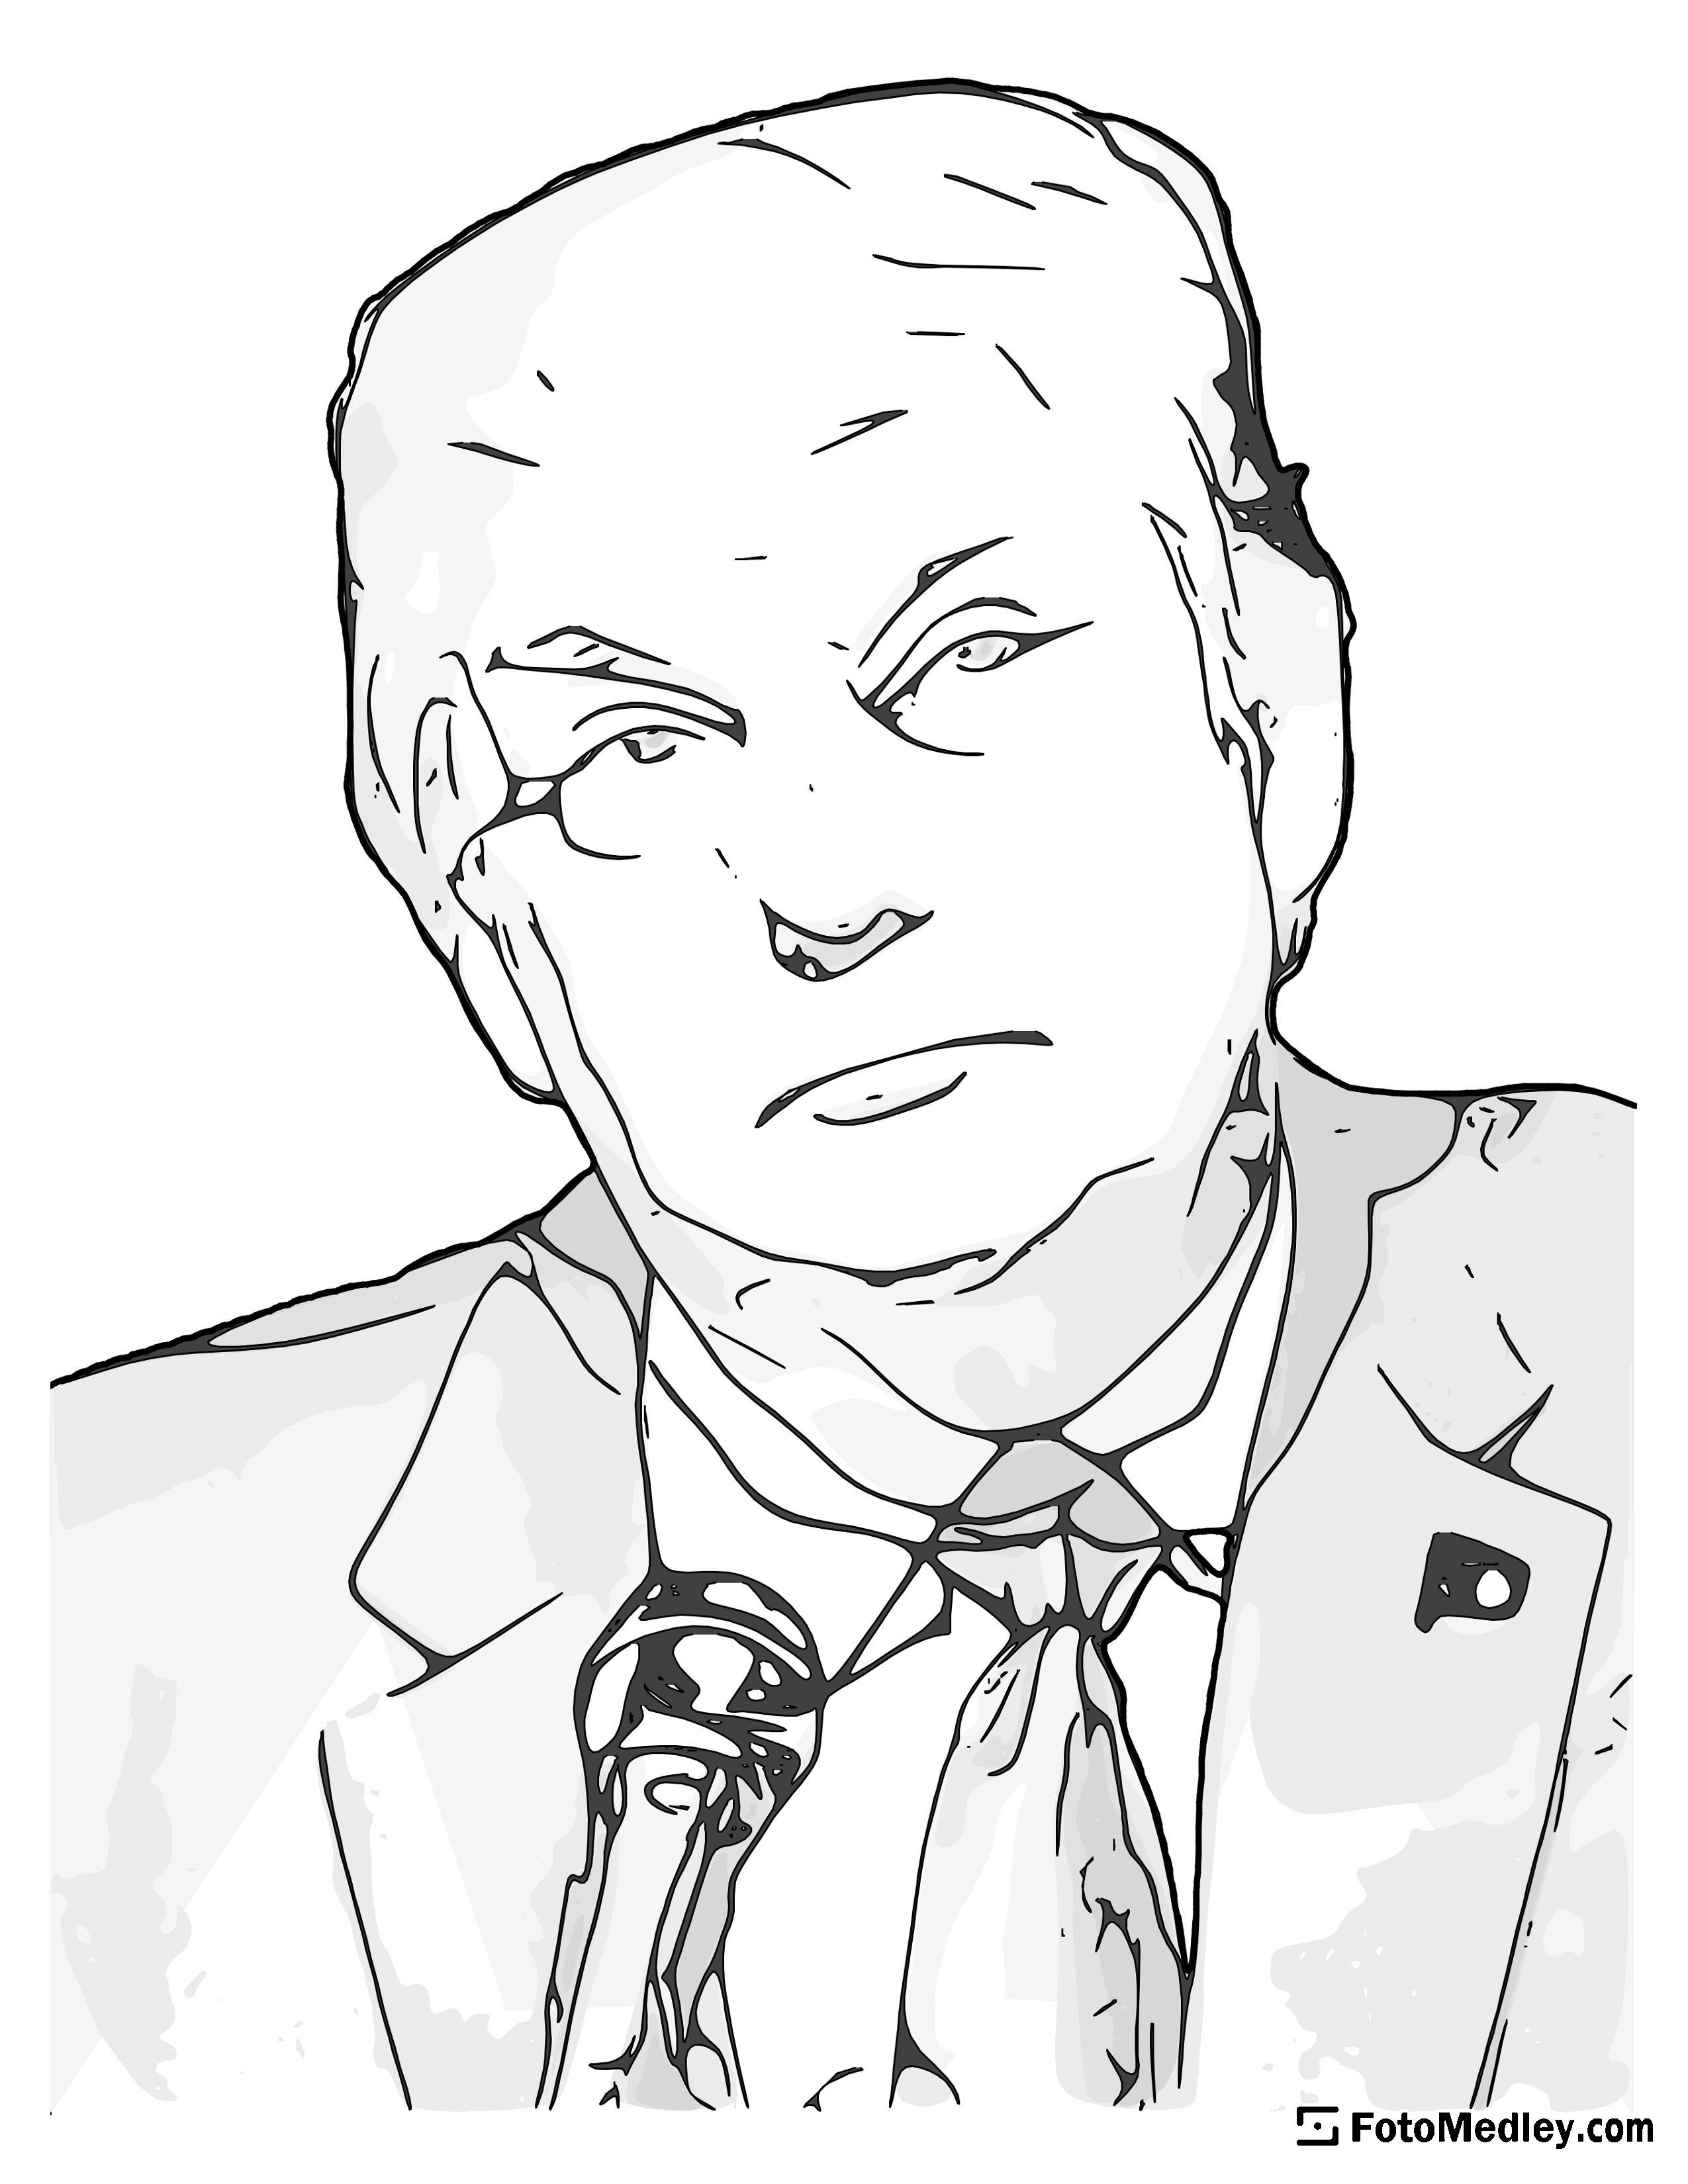 A cartoon style coloring sketch of Donald Trump, 45th President of the United States.